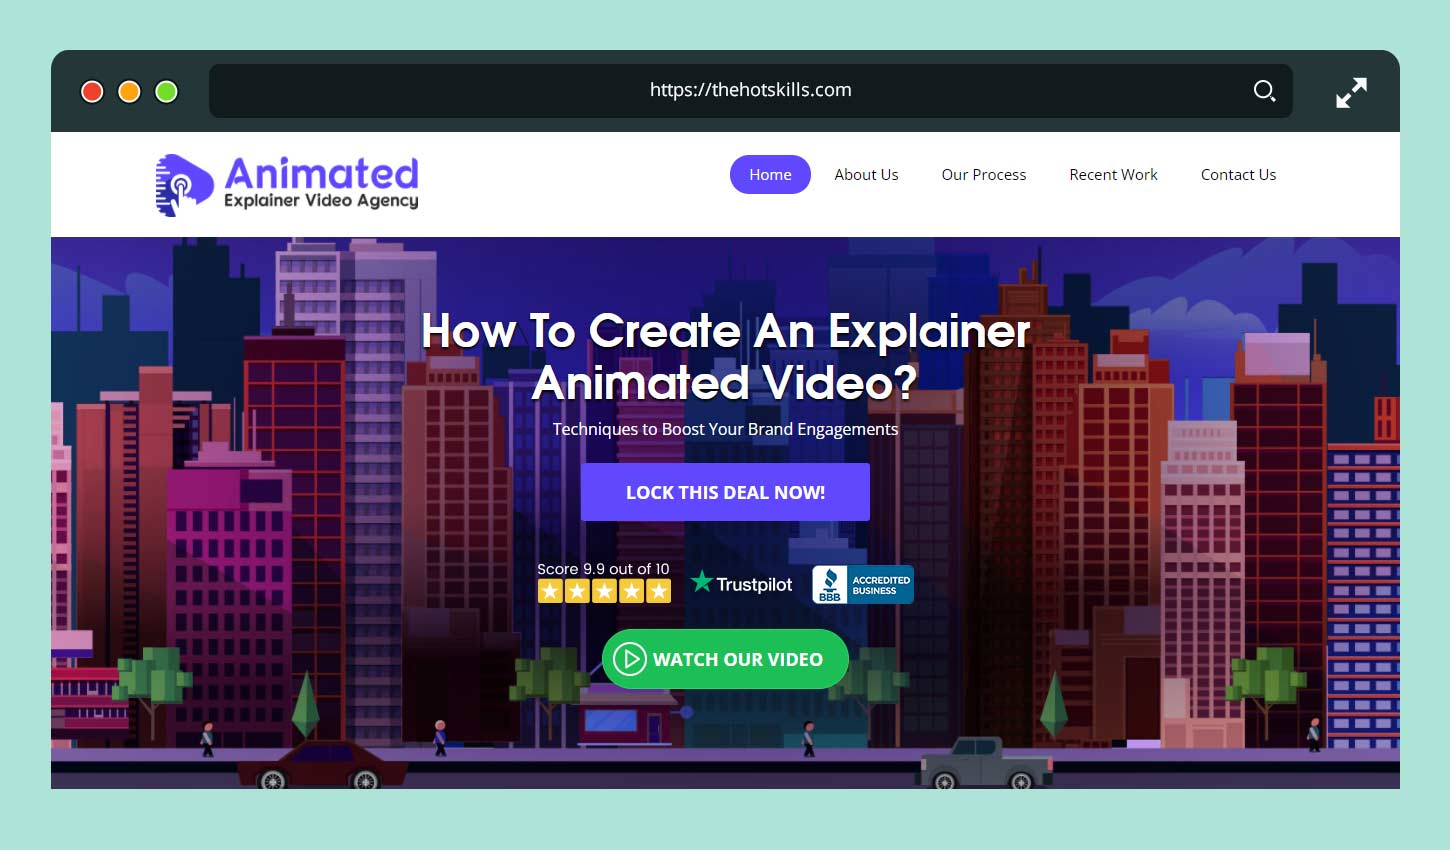 Animation Video Explainer Agency